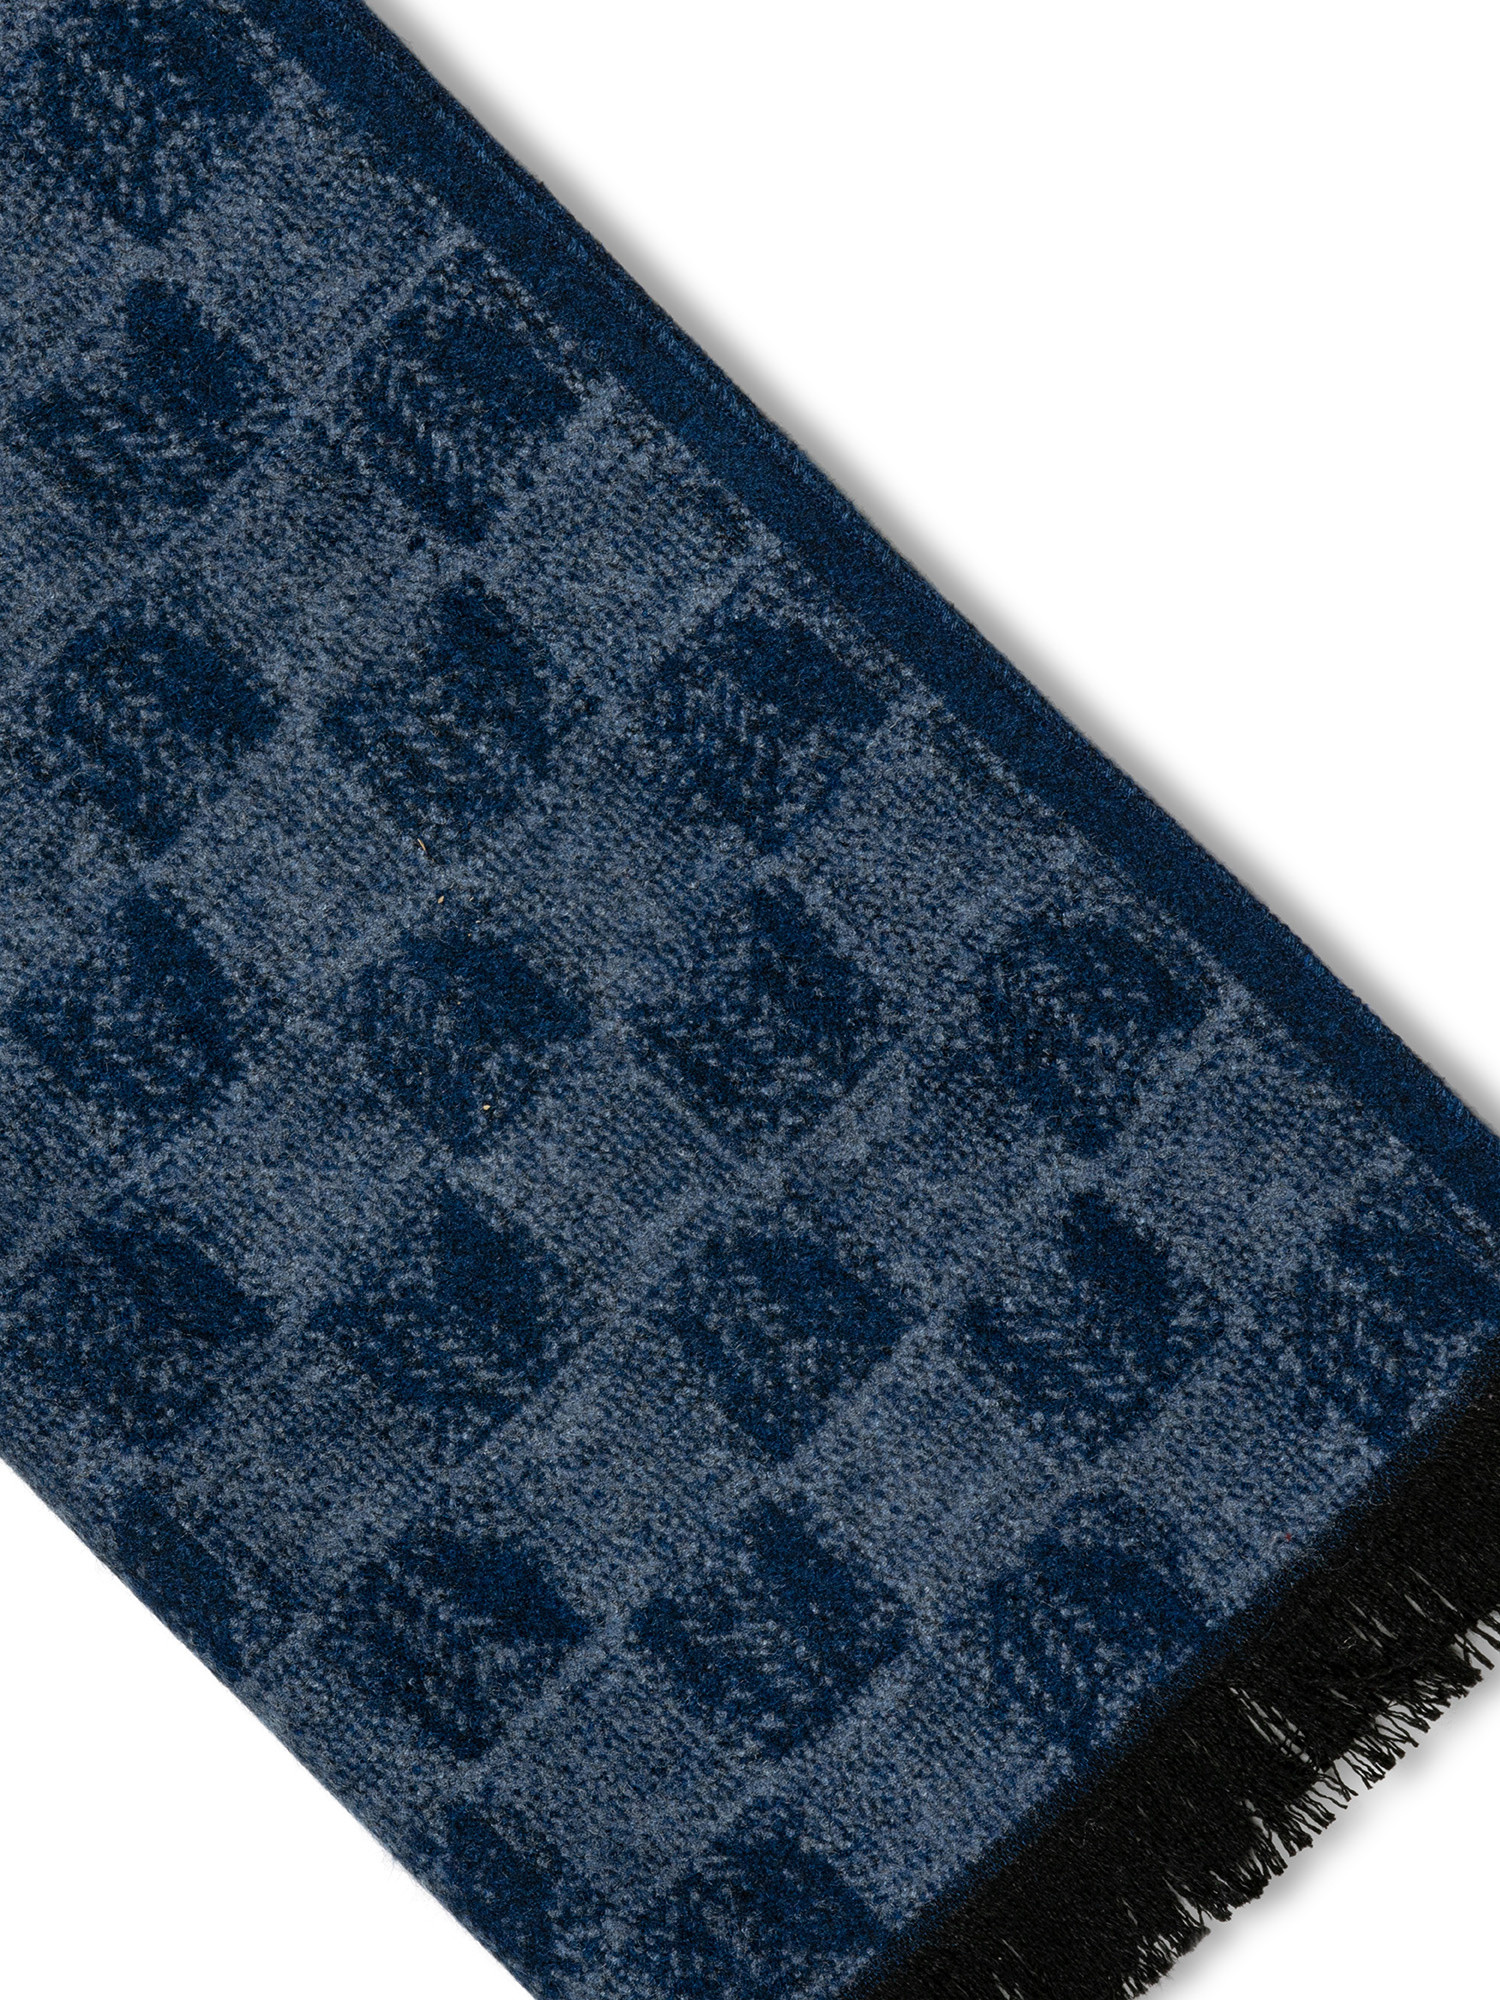 Luca D'Altieri - Checkerboard scarf, Blue, large image number 1